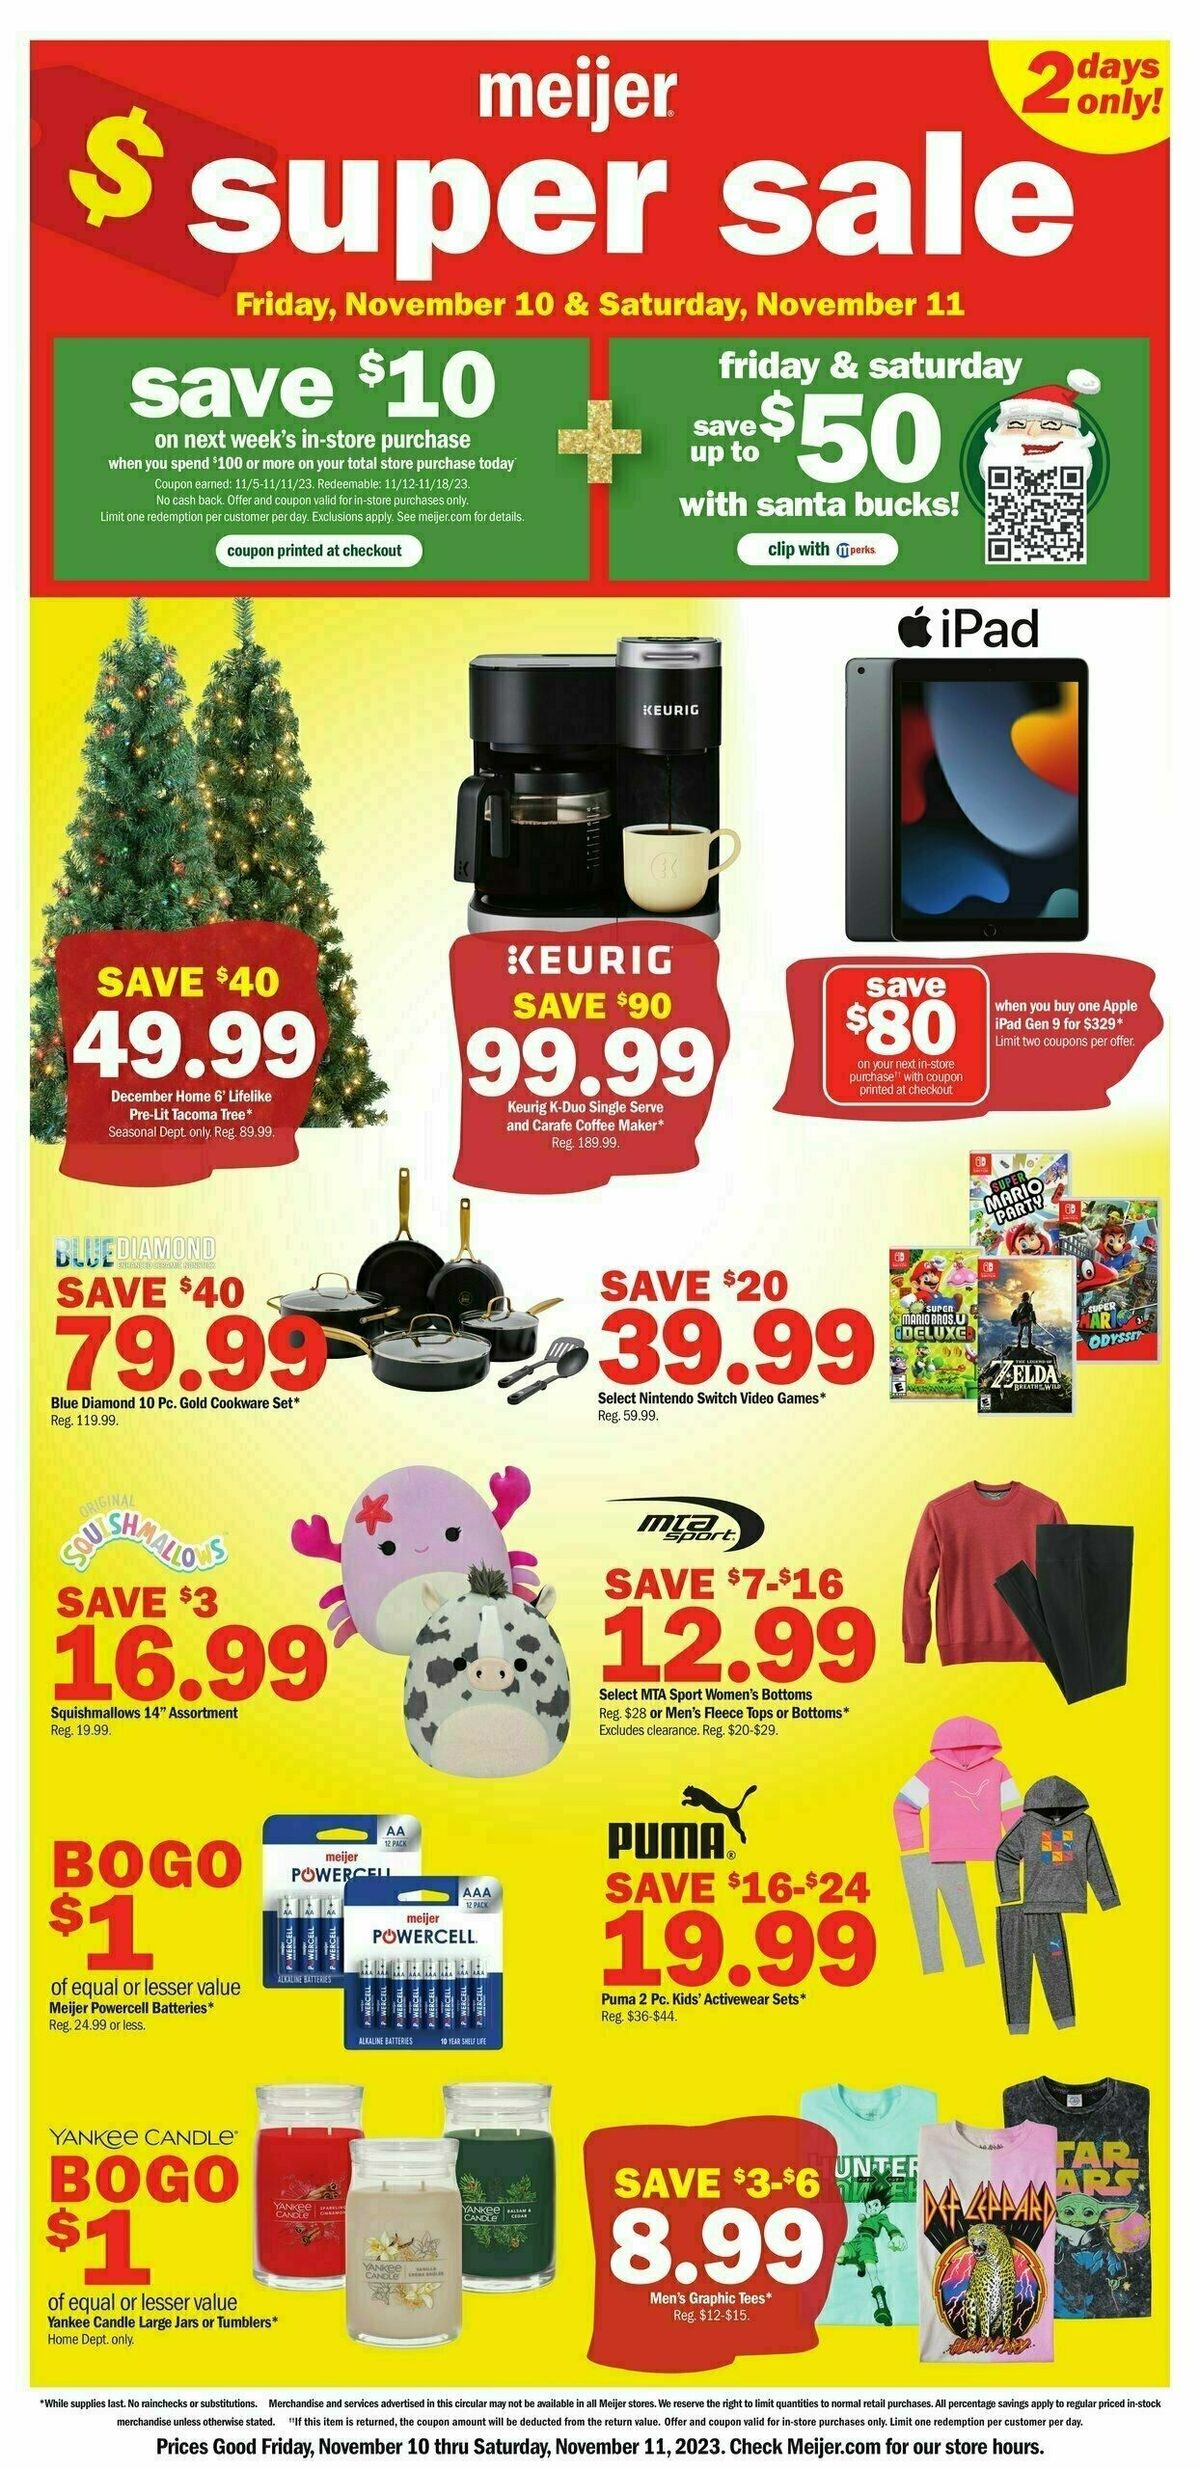 Meijer Super Sale Ad Weekly Ad from November 10